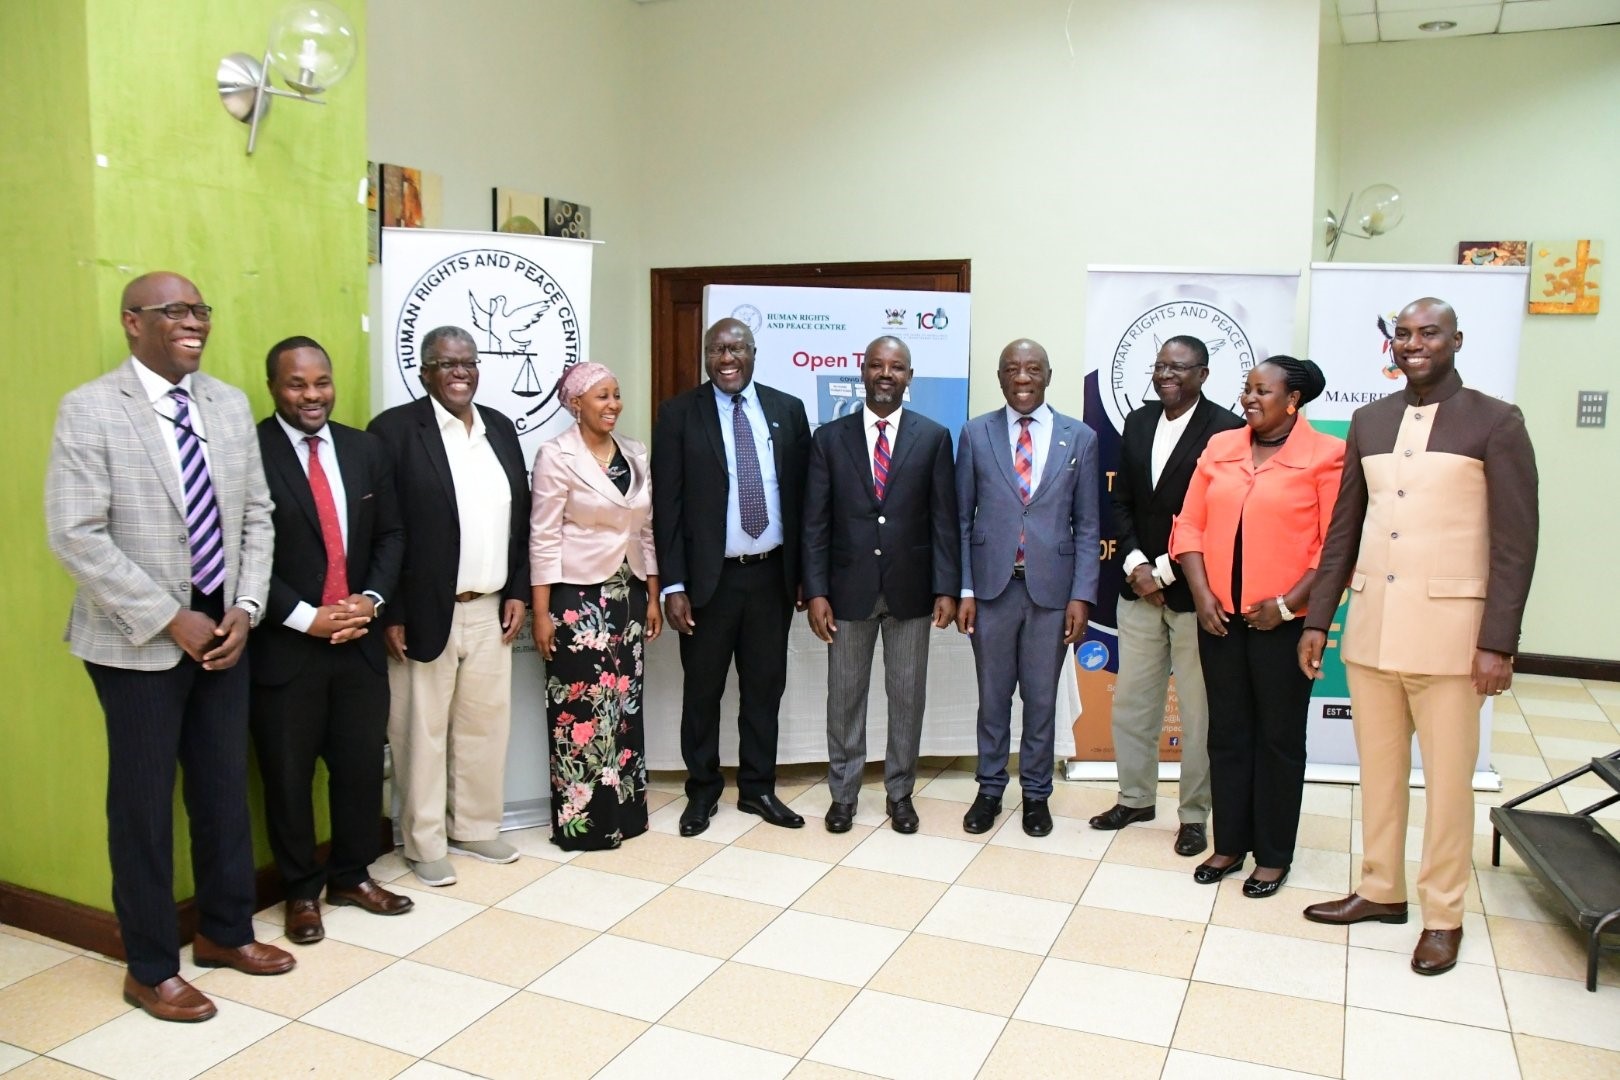 The Deputy Speaker of Parliament-Rt. Hon. Thomas Tayebwa (5th Right) flanked by the DVCFA-Prof. Henry Alinaitwe (4th Right) and Principal SoL-Prof. Ronald Naluwairo (5th Left) and other officials at the launch of the HURIPEC Report on 26th April 2023, Kampala Uganda. Photo Twitter: @Thomas_Tayebwa